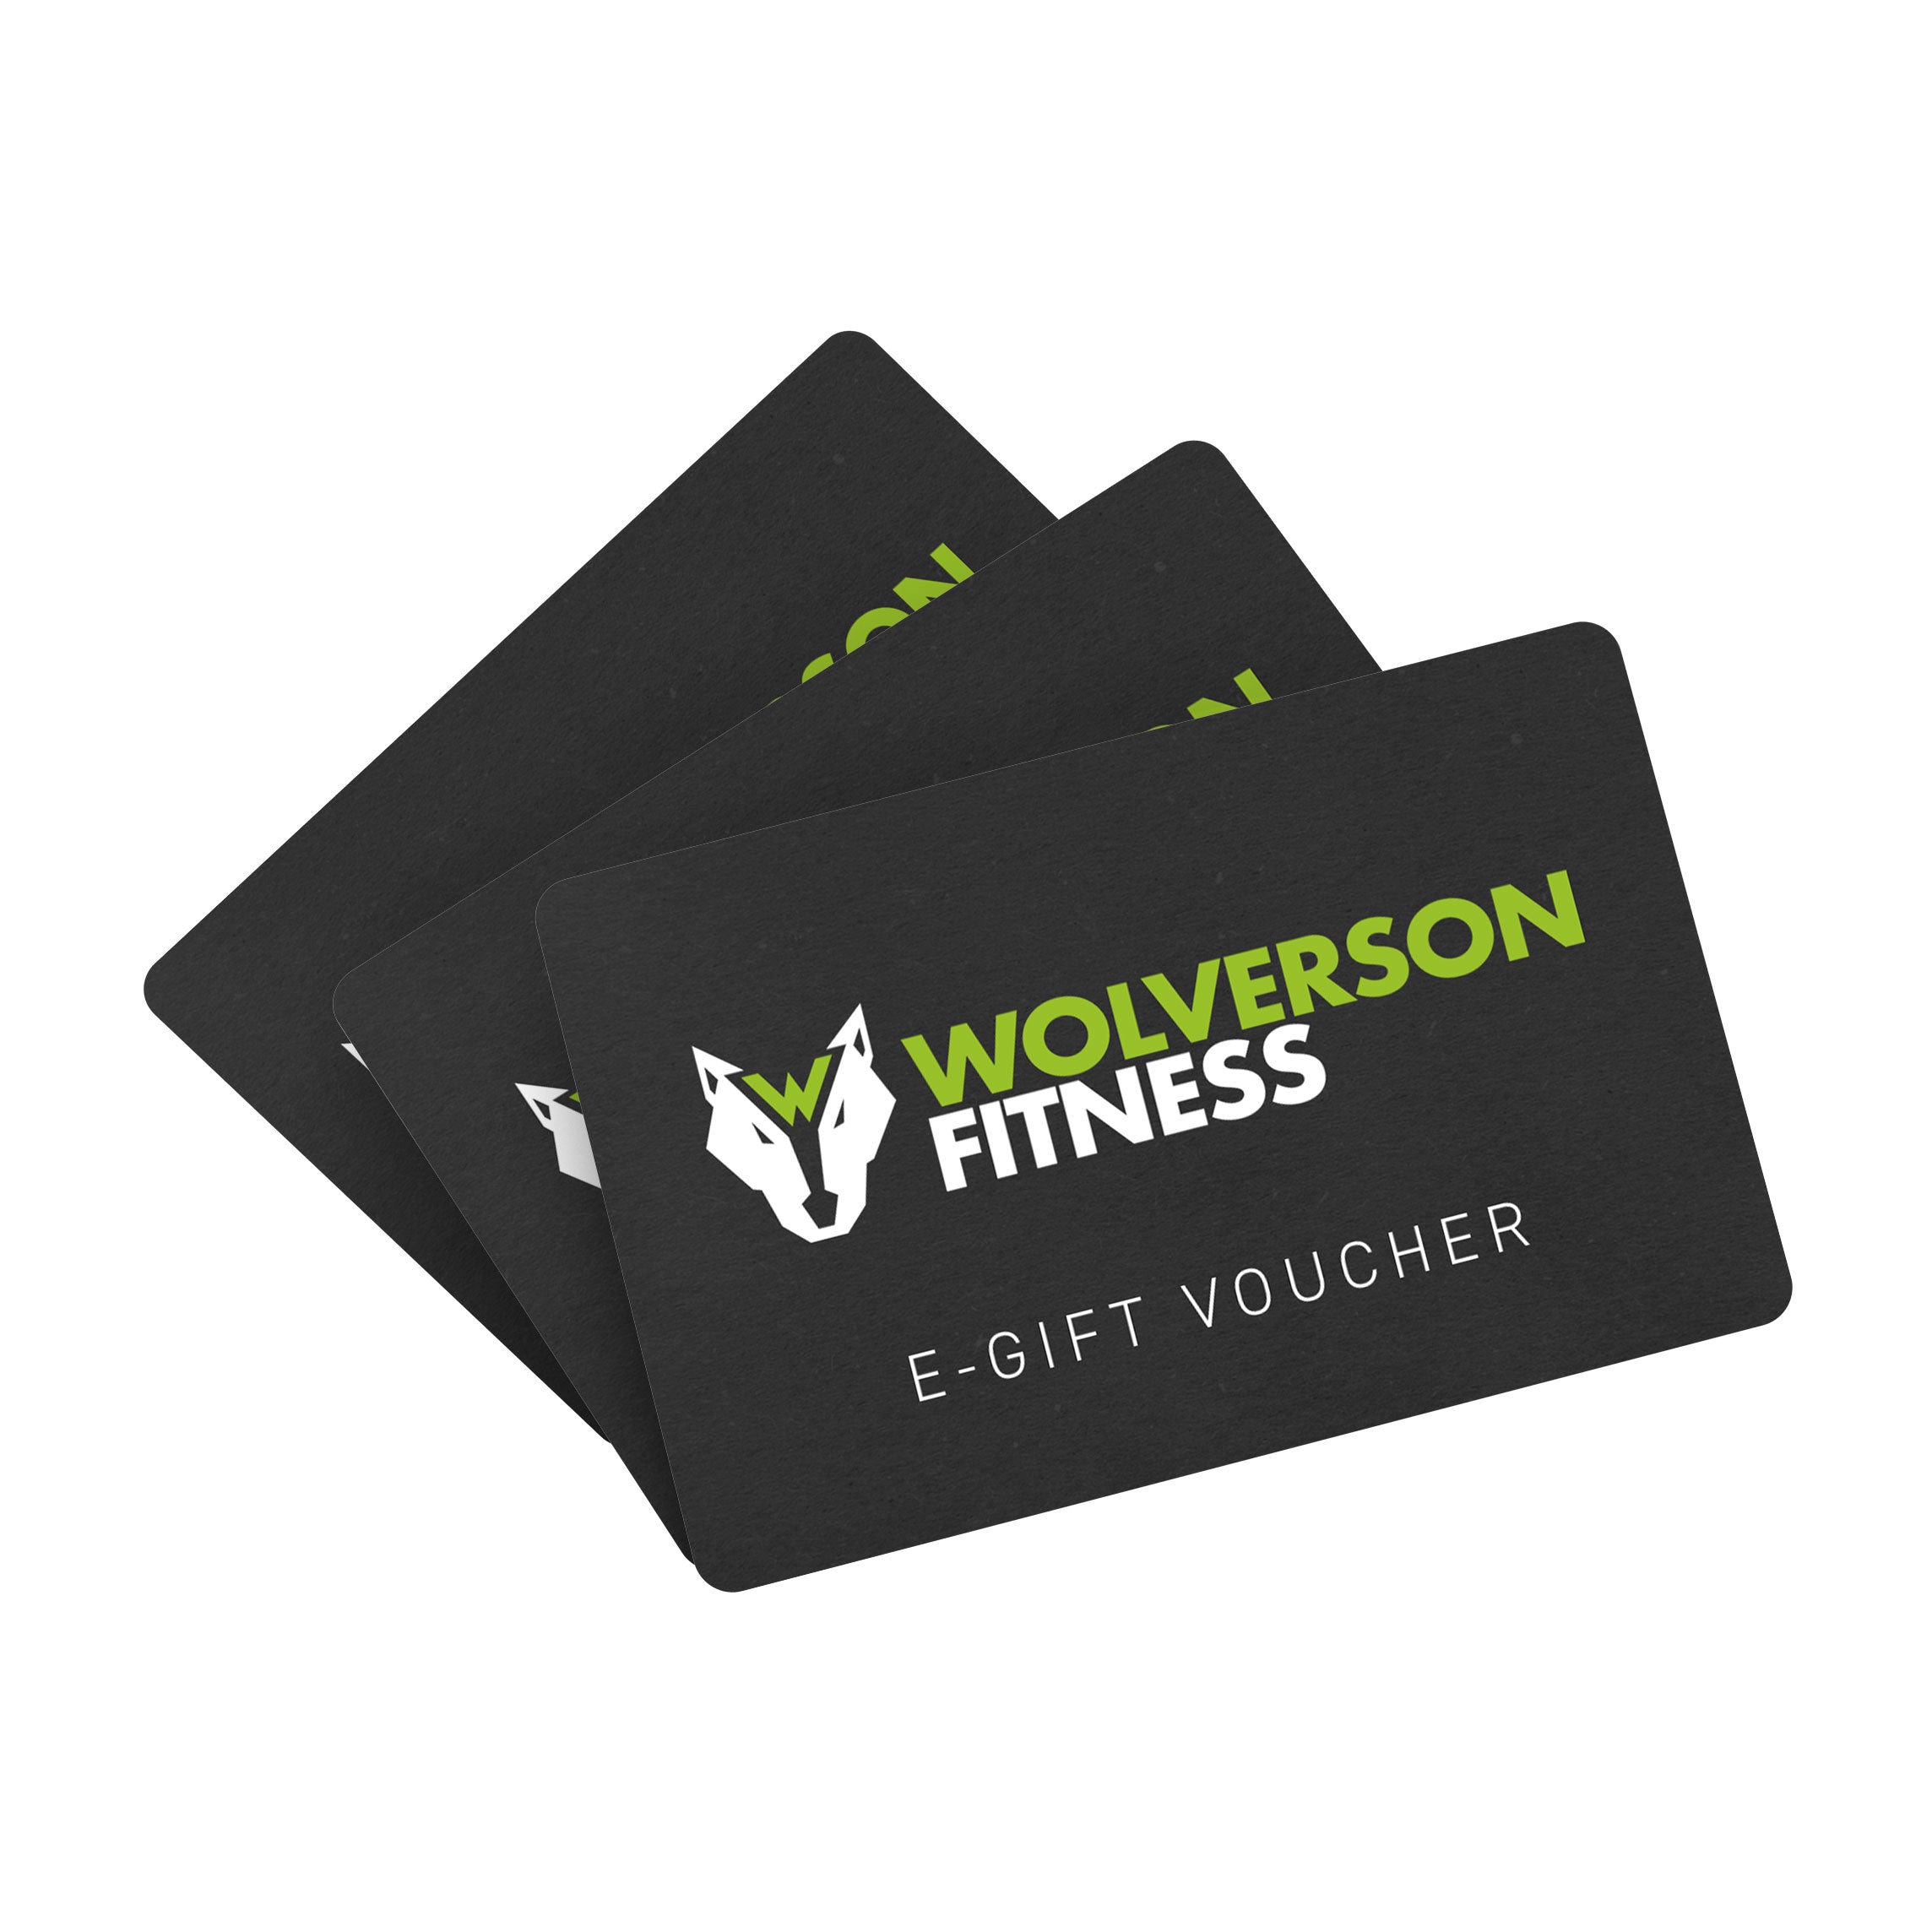 Wolverson Fitness E-Gift Voucher - Wolverson Fitness